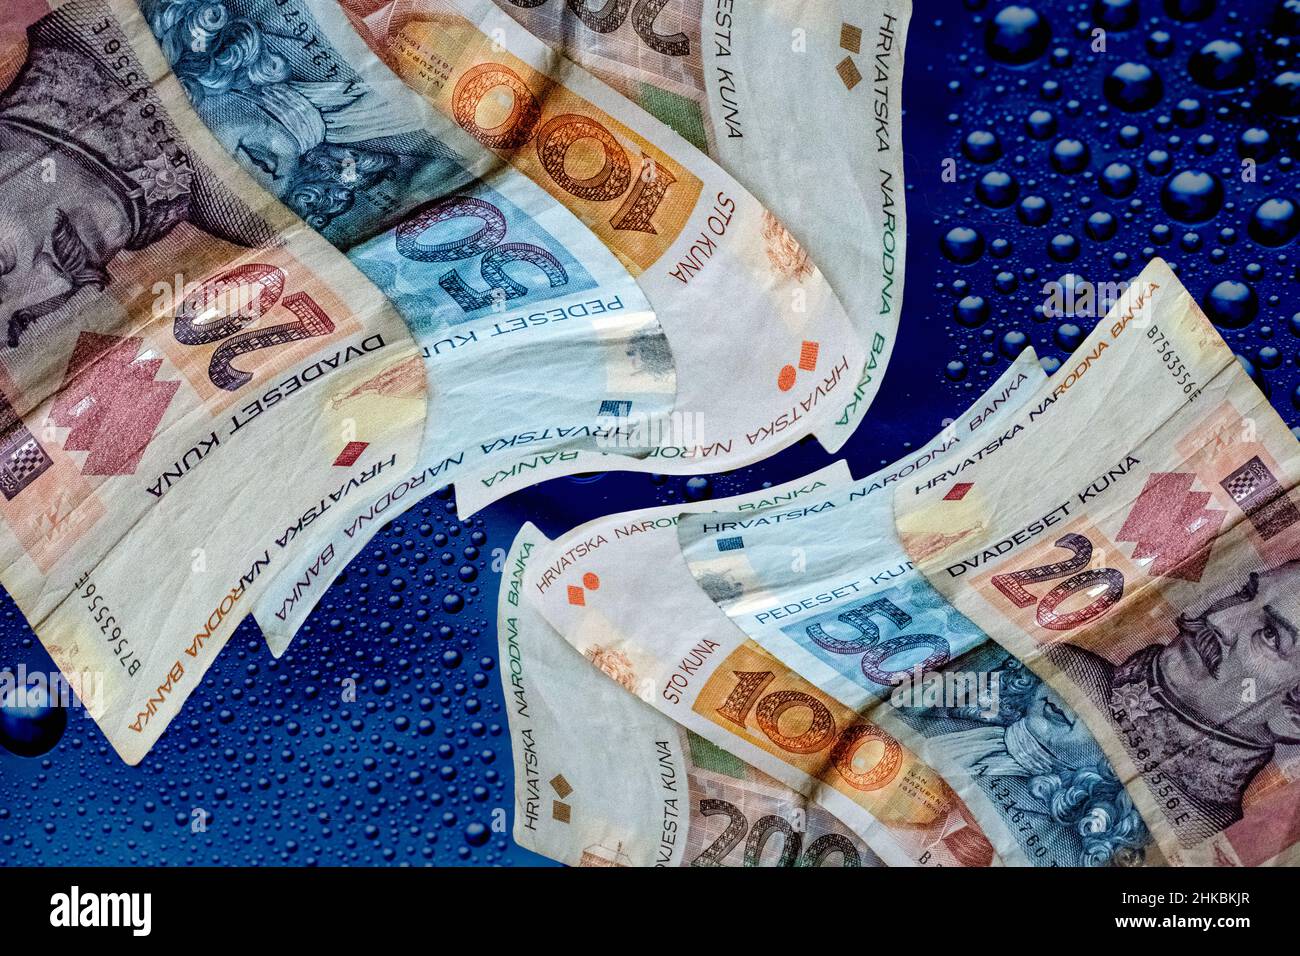 Currency : Croatian Banknotes Stock Photo